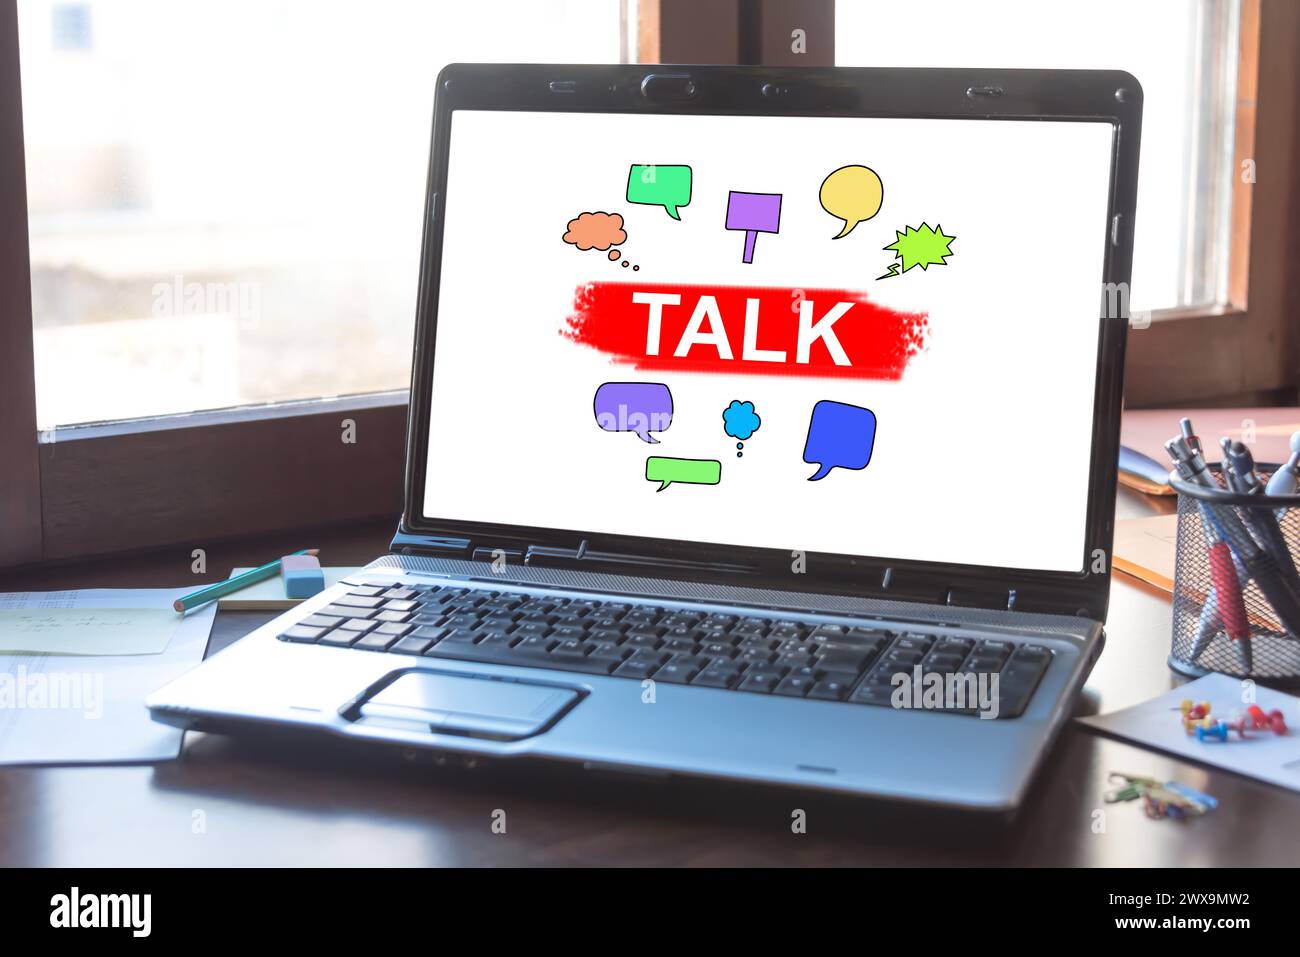 Laptop screen displaying a talk concept Stock Photo